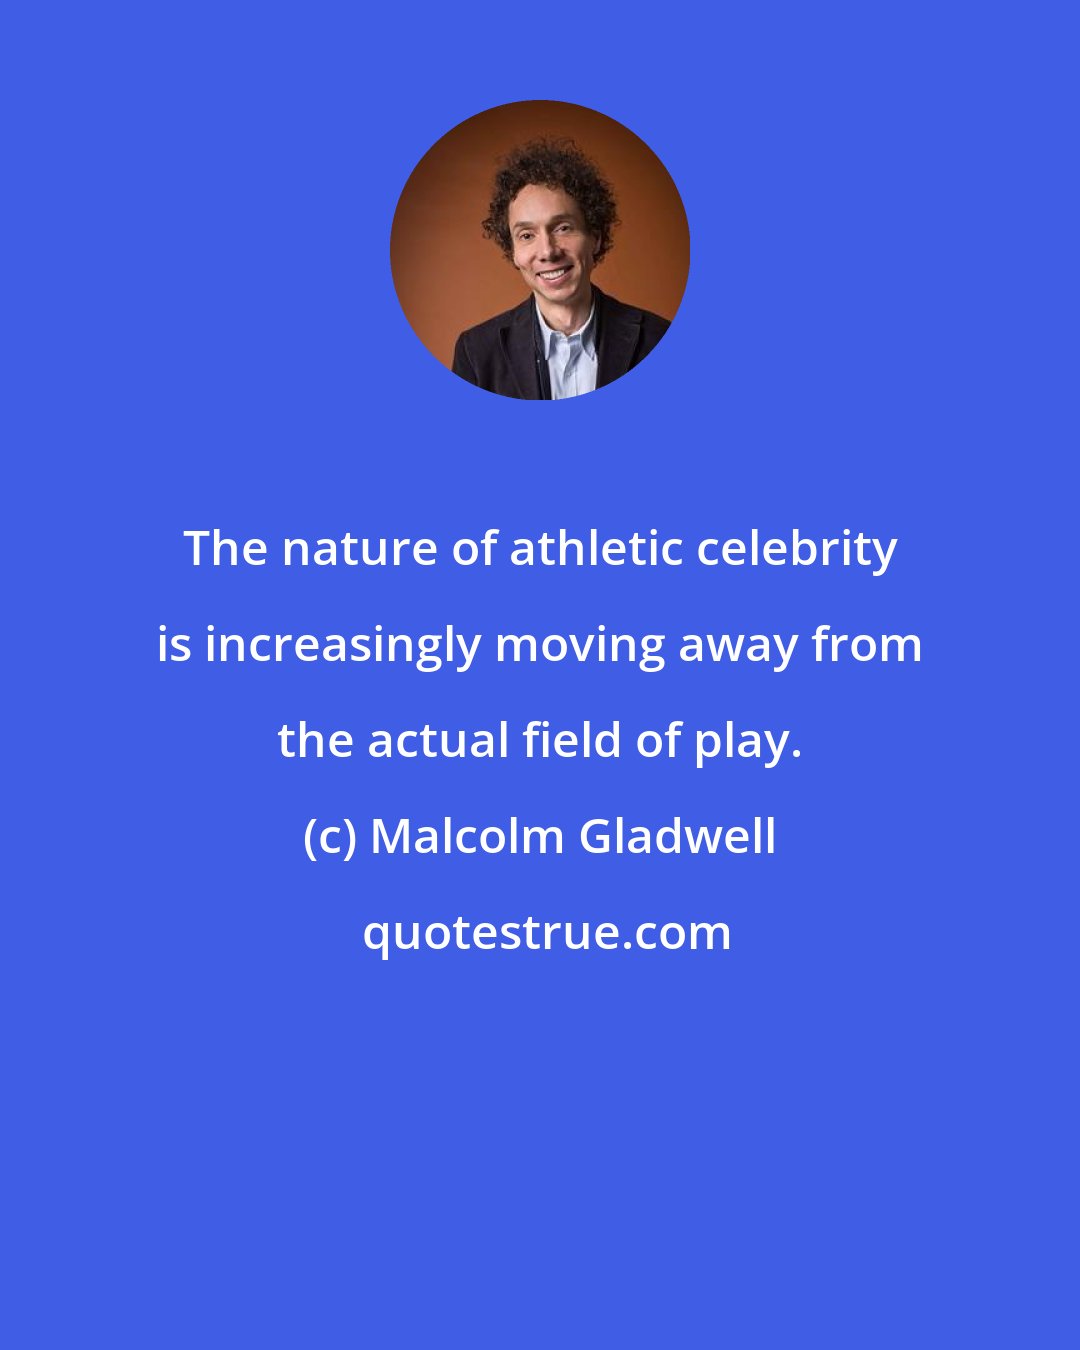 Malcolm Gladwell: The nature of athletic celebrity is increasingly moving away from the actual field of play.